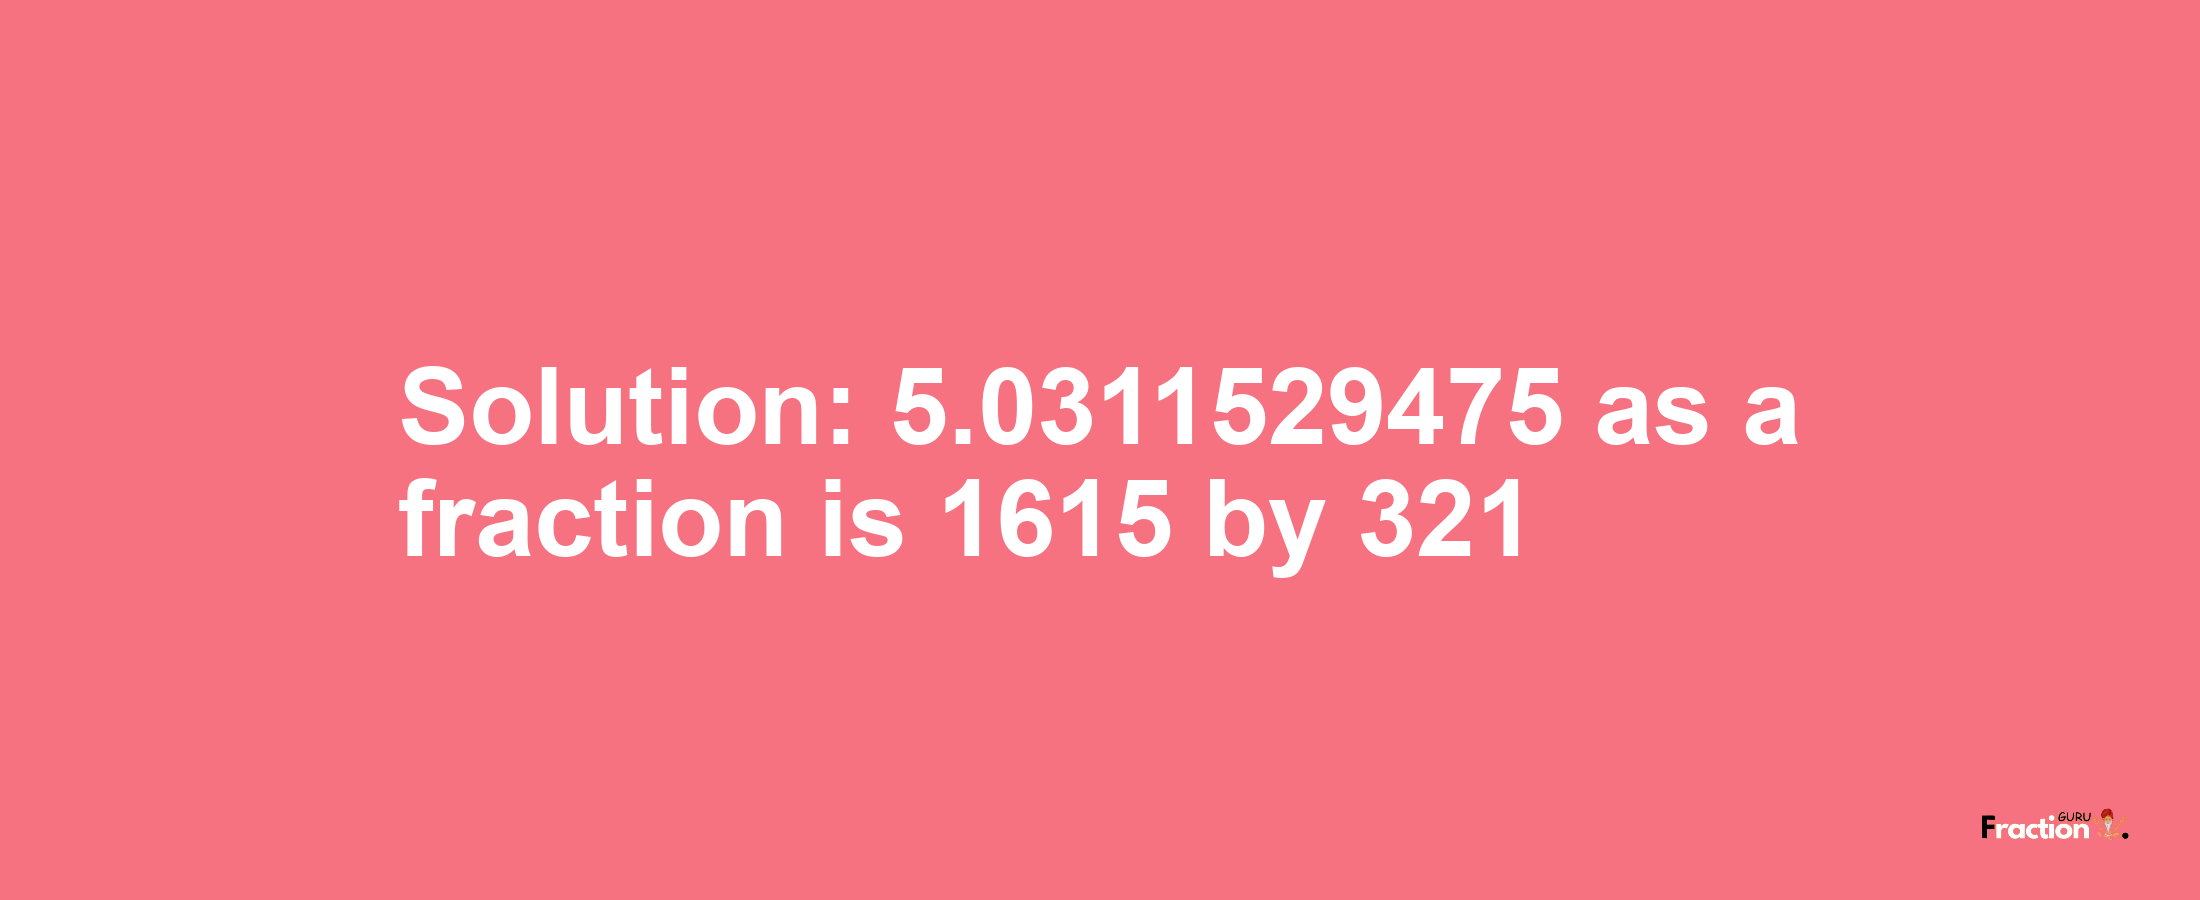 Solution:5.0311529475 as a fraction is 1615/321